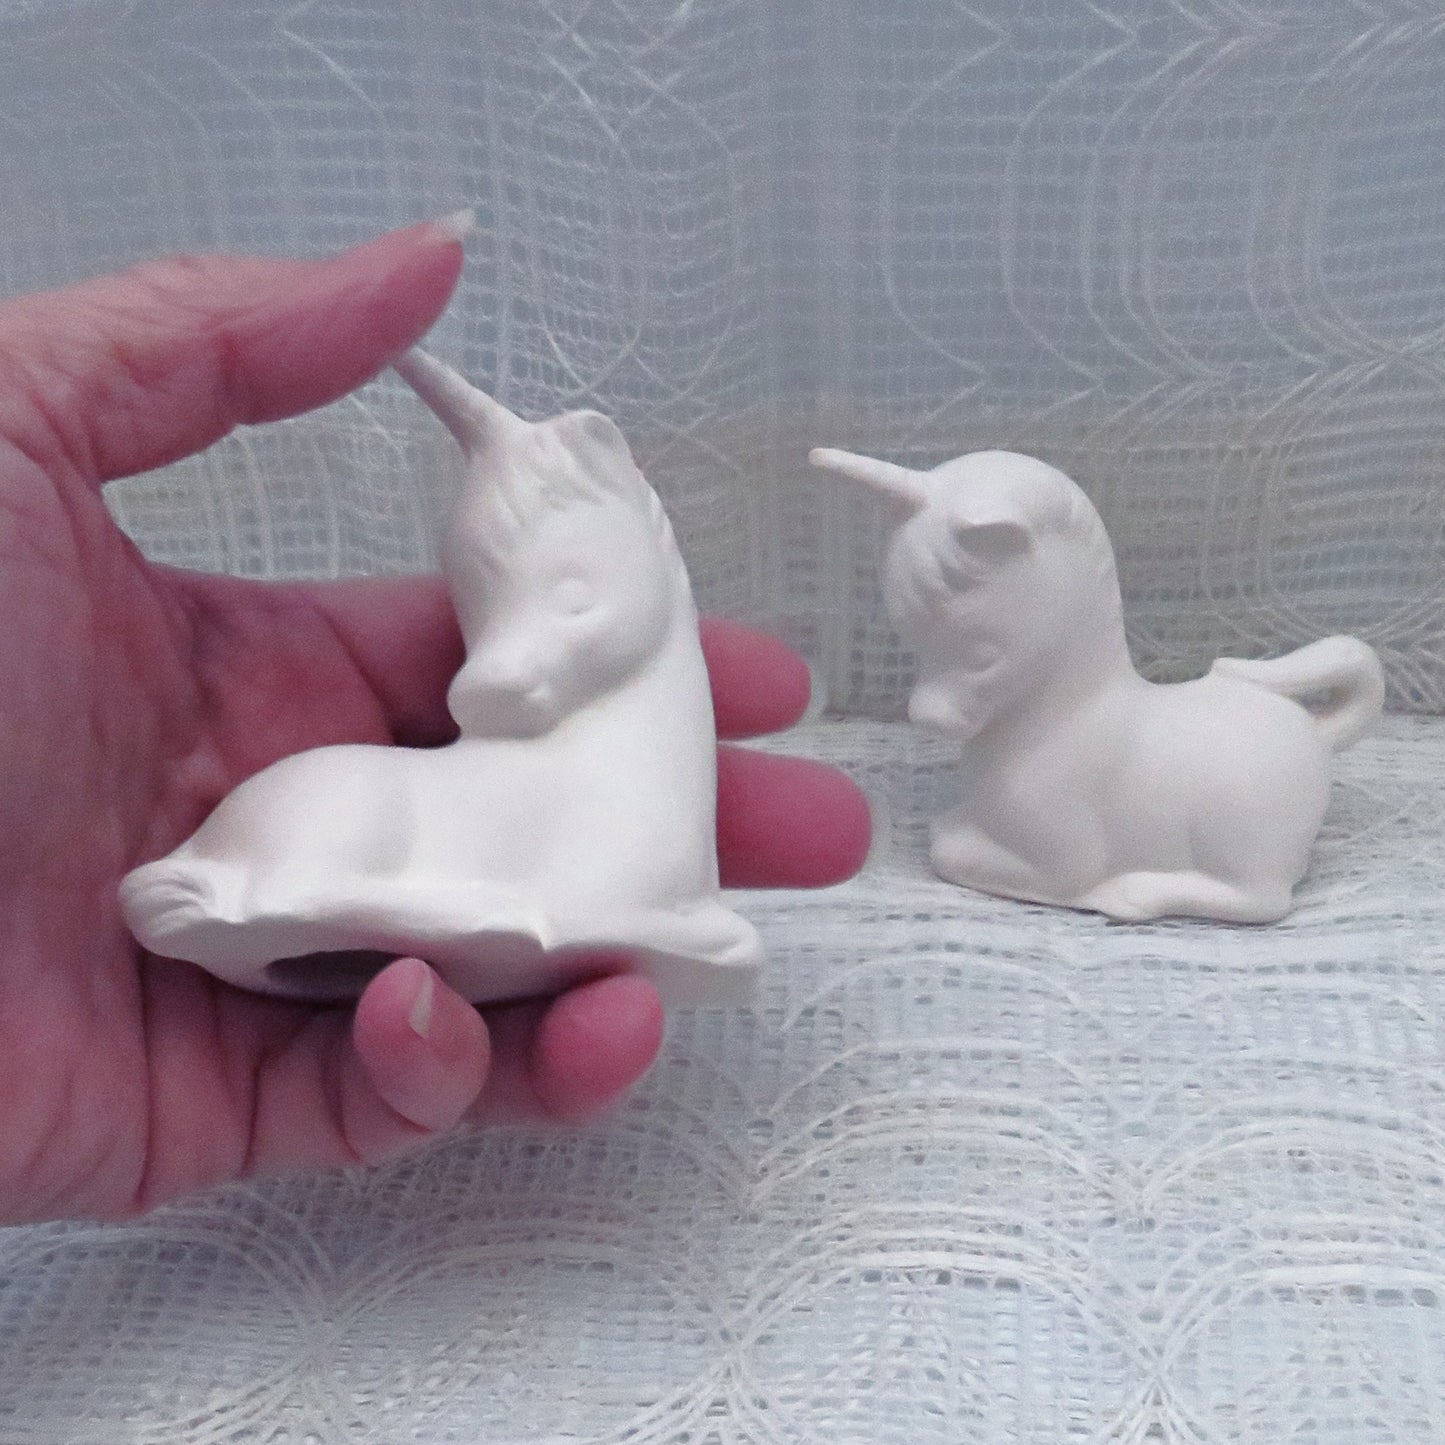 2 unpainted ceramic bisque unicorns with one in my hand for size comparison